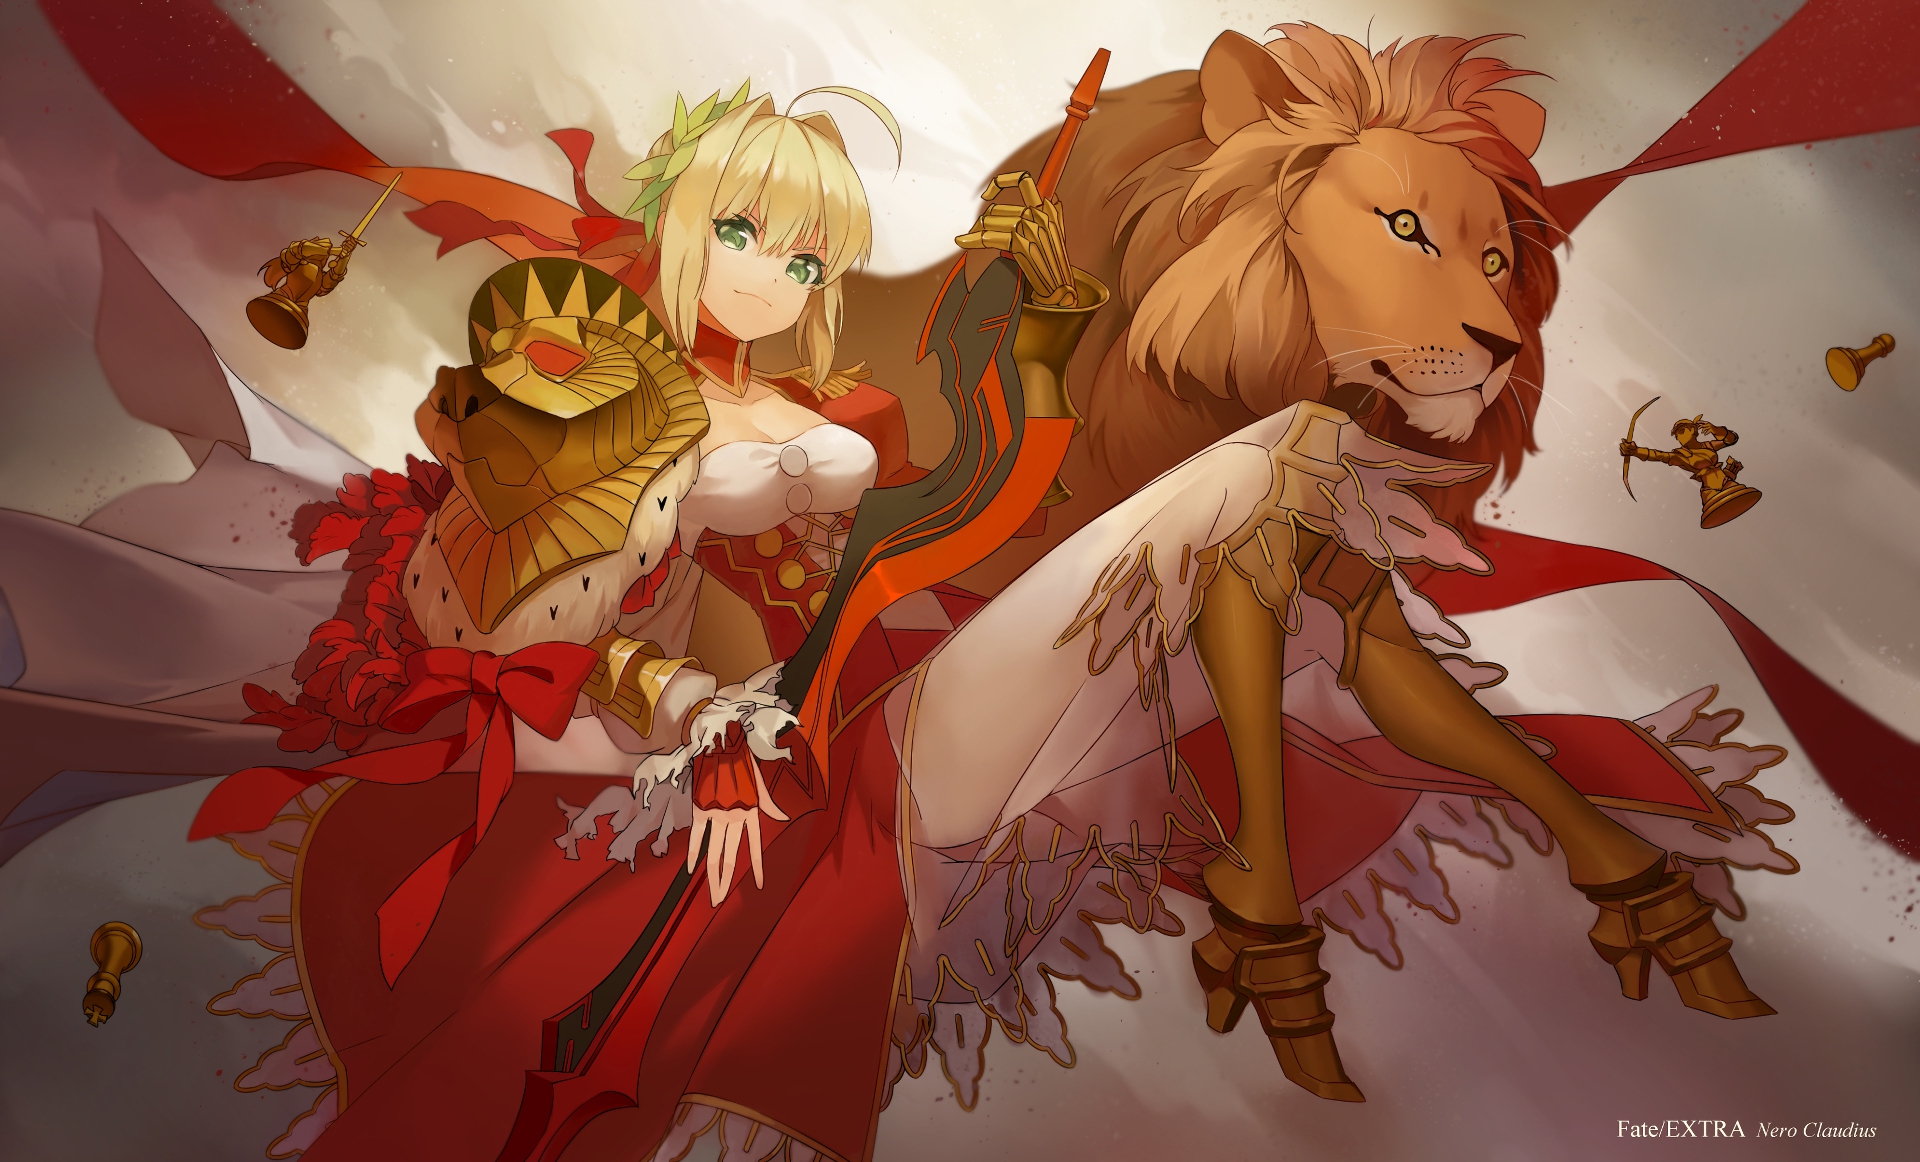 anime, fate/extra, nero claudius, red saber, fate series High Definition image